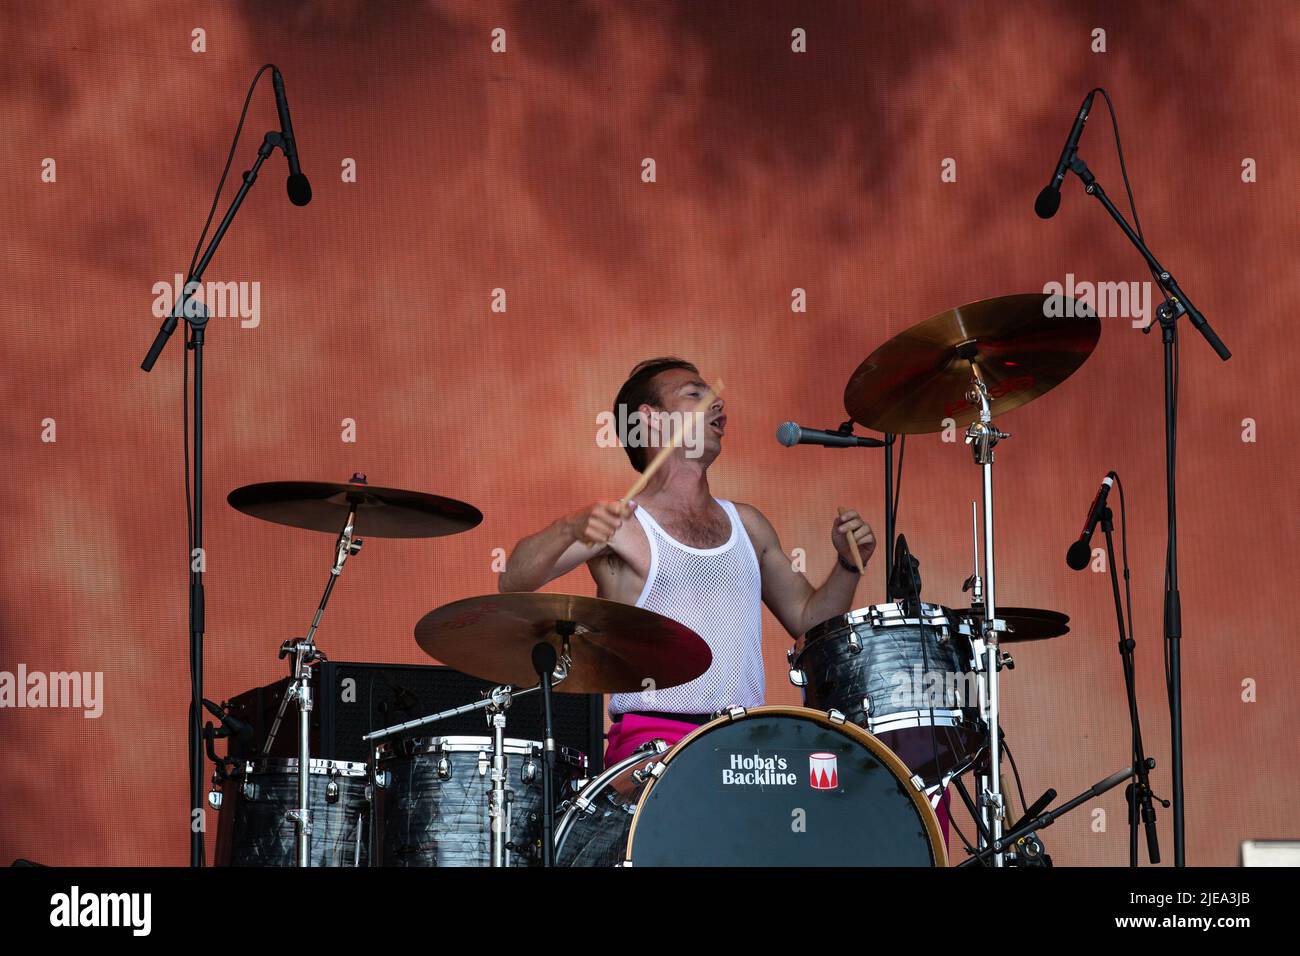 Oslo, Norway. 24th, June 2022. The Danish rock band D-A-D performs a live concert during the Norwegian music festival Tons of Rock 2022 in Oslo. Here drummer Laust Sonne is seen live on stage. (Photo credit: Gonzales Photo - Per-Otto Oppi). Stock Photo